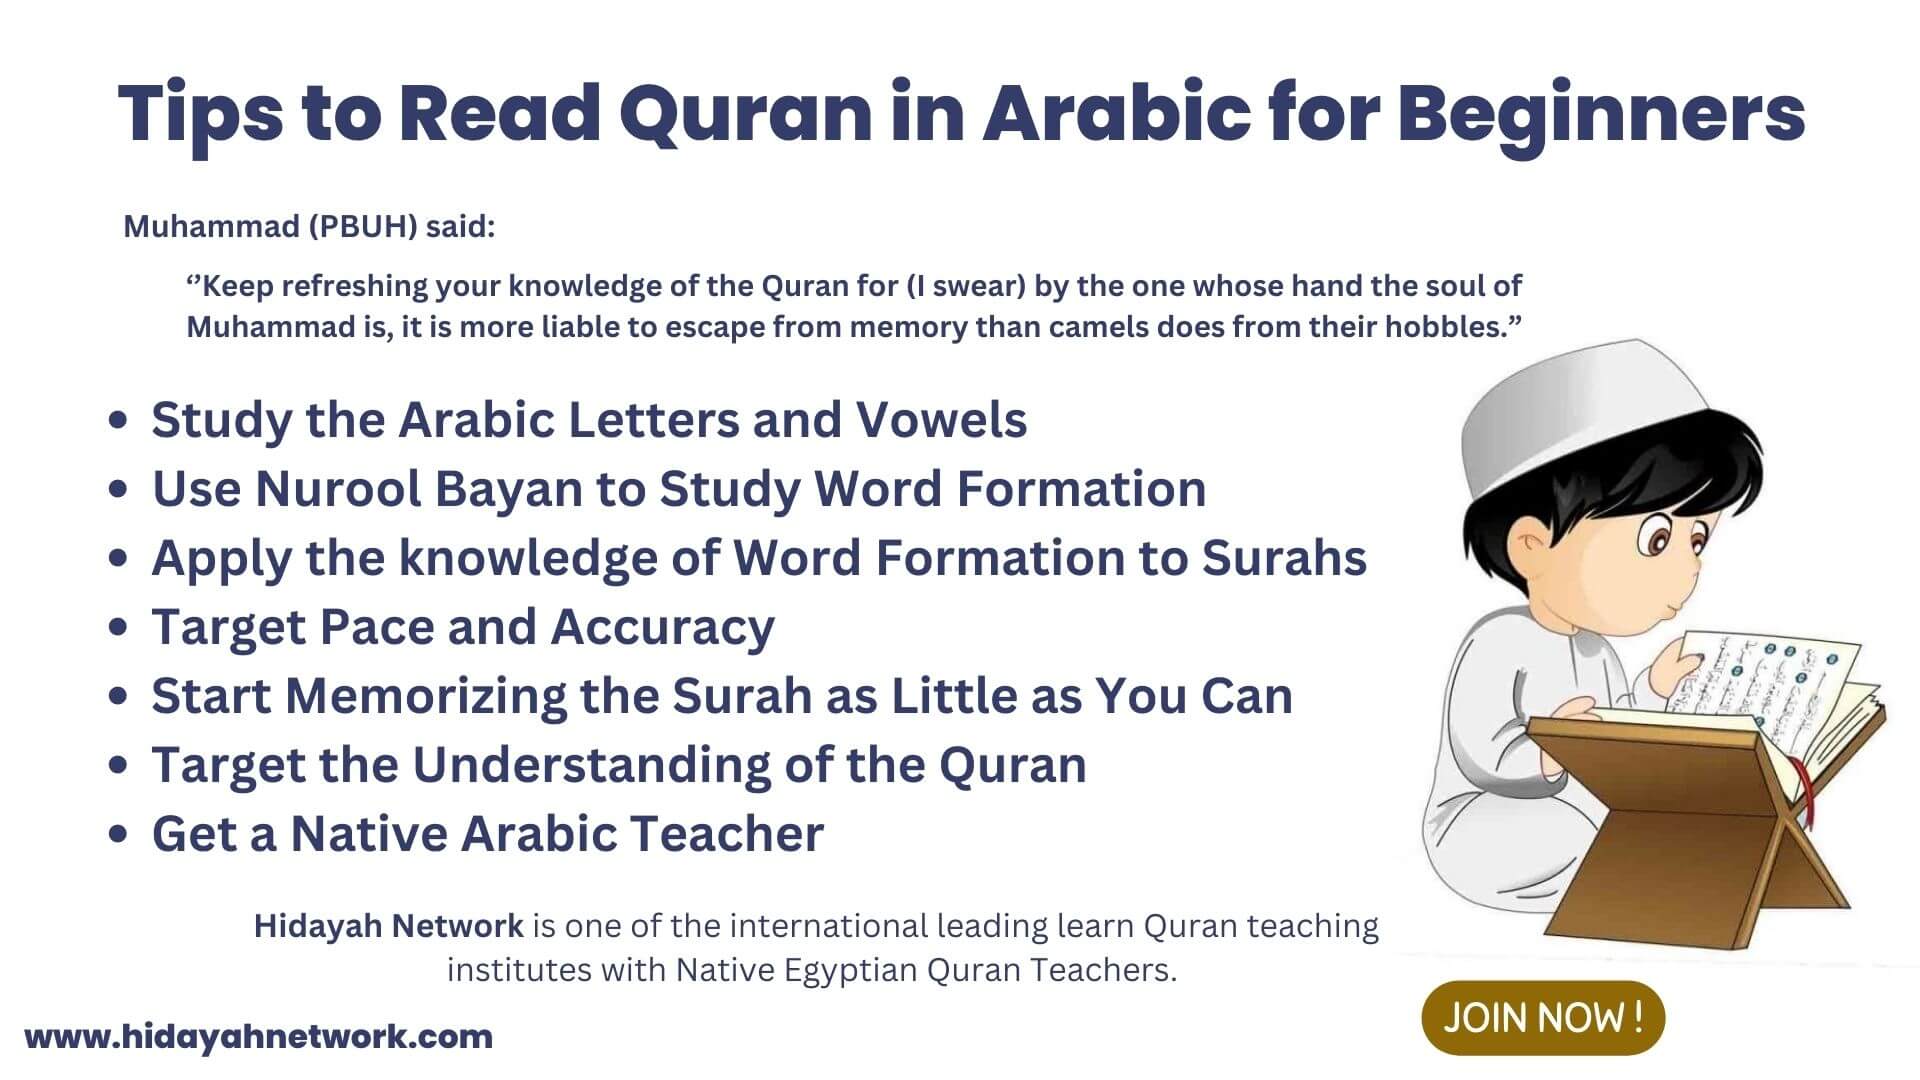 Tips to Read Quran in Arabic for Beginners